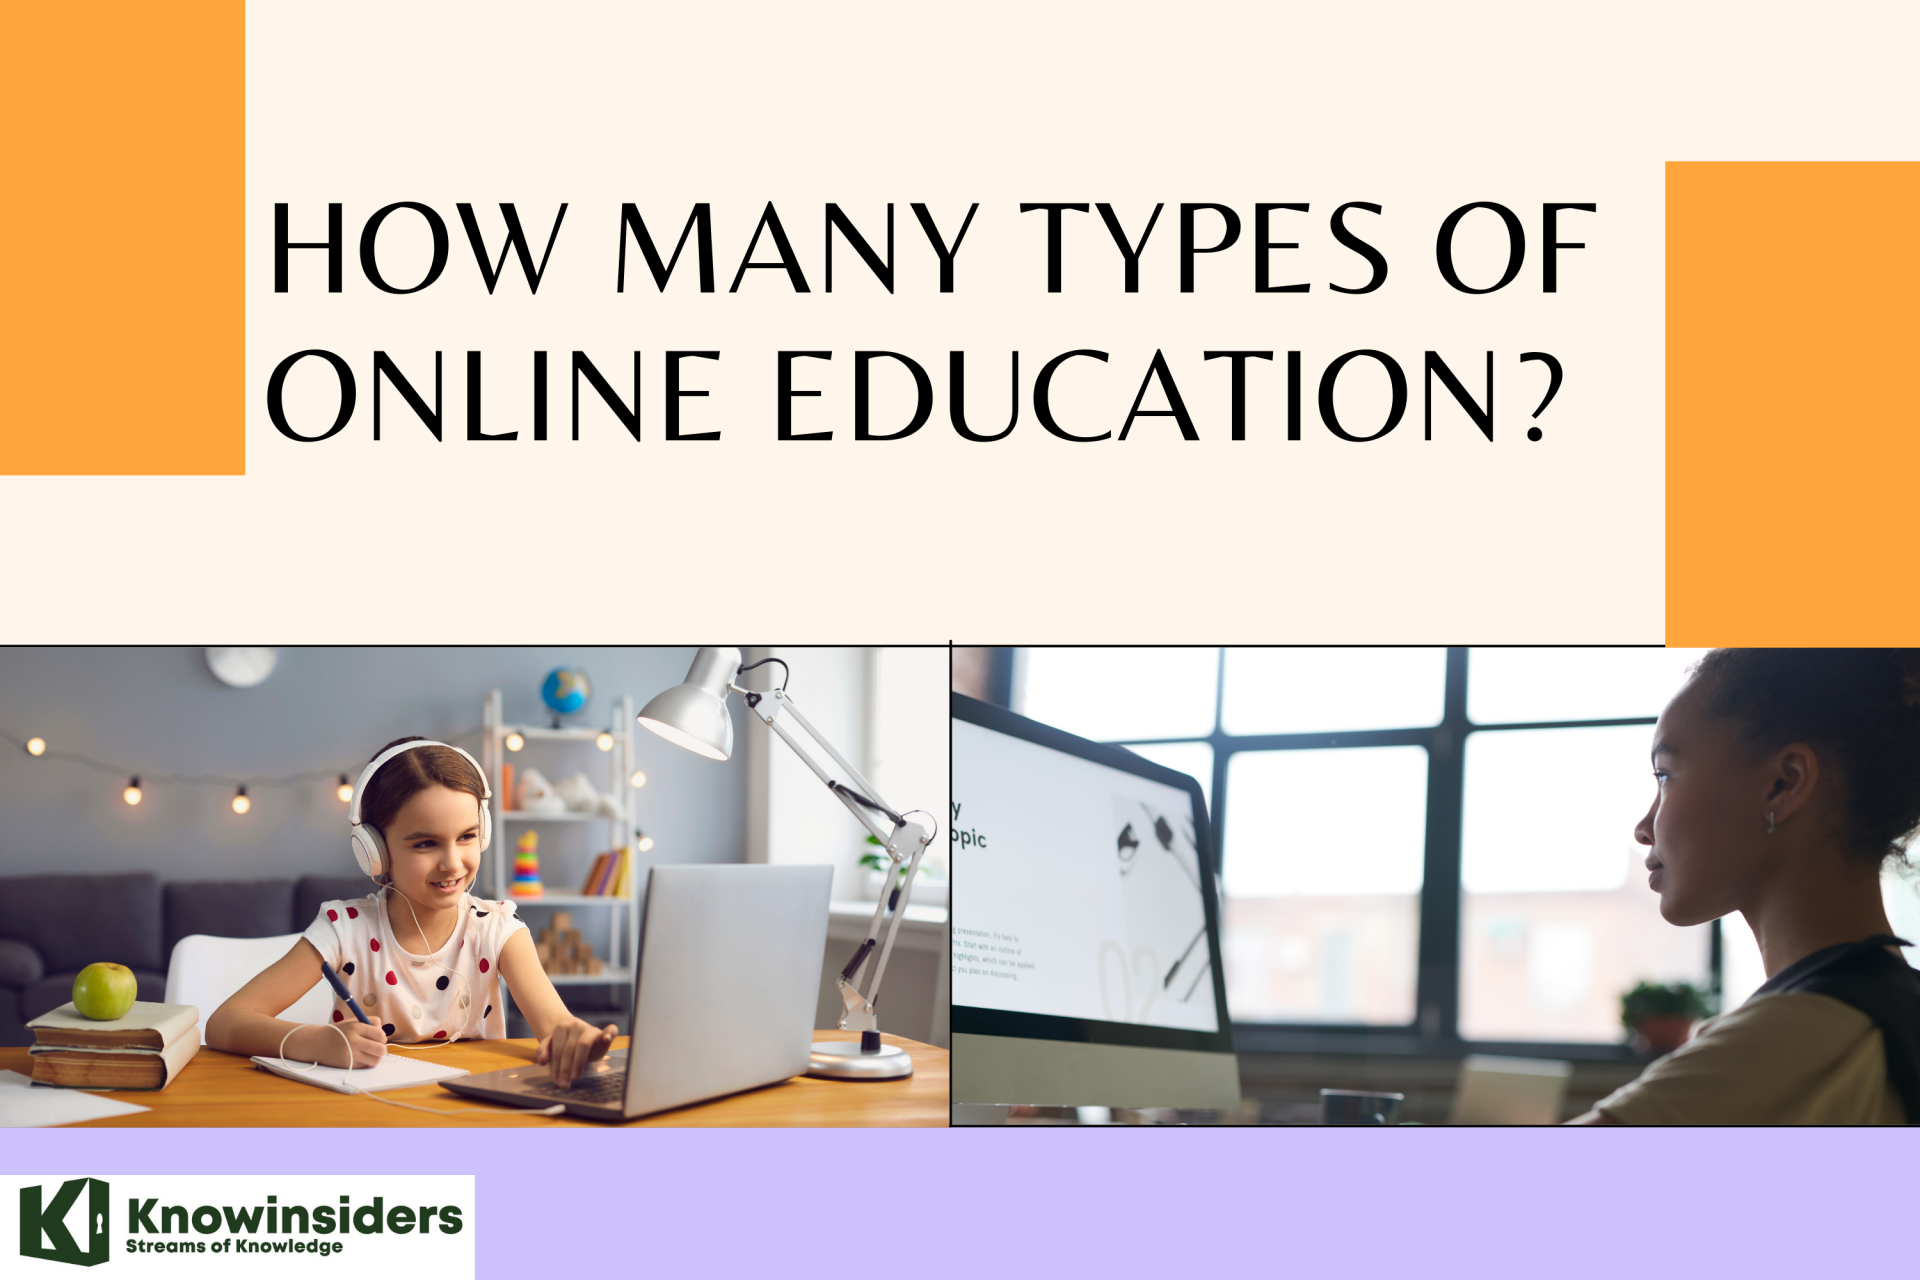 How Many Types of Online Education and Online Learning?